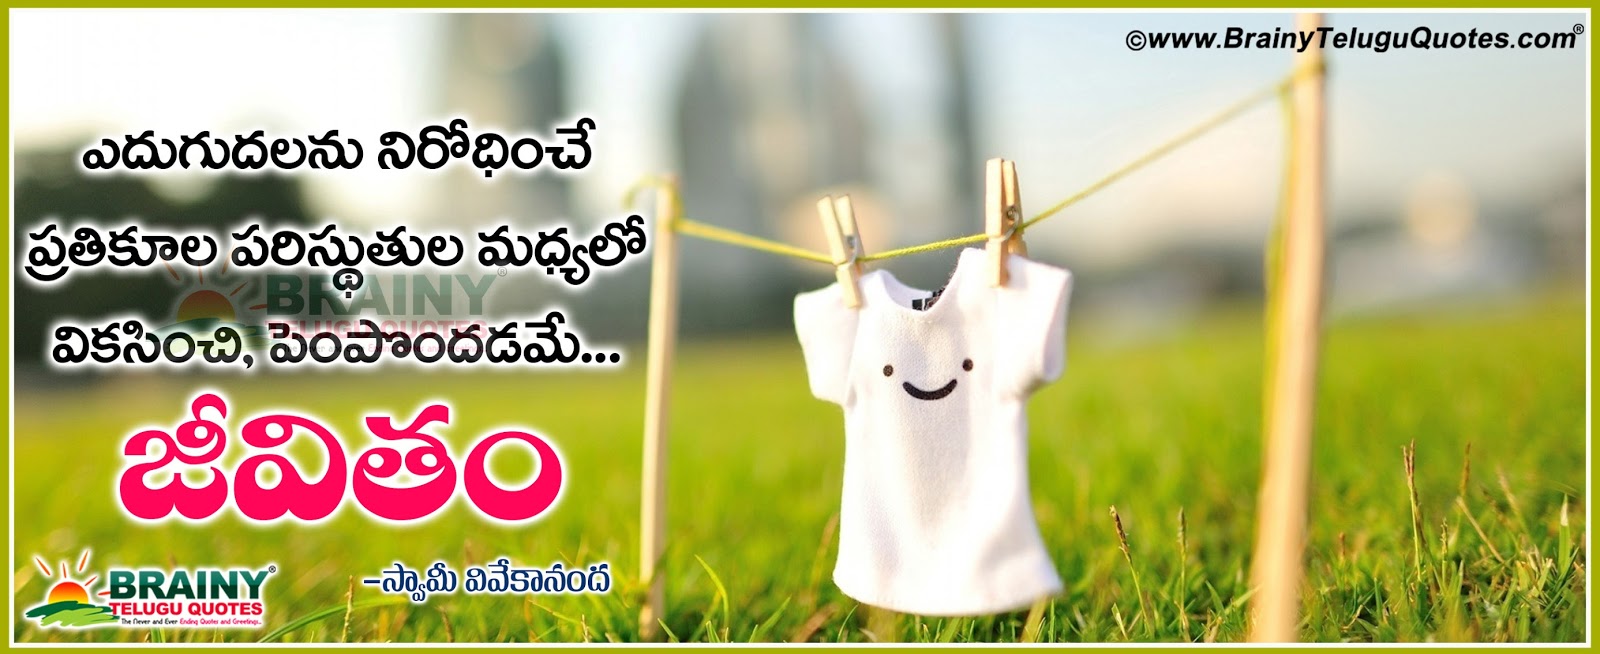 Here is a Telugu Good morning Motivational Quotes and Sayings images for cover pictures